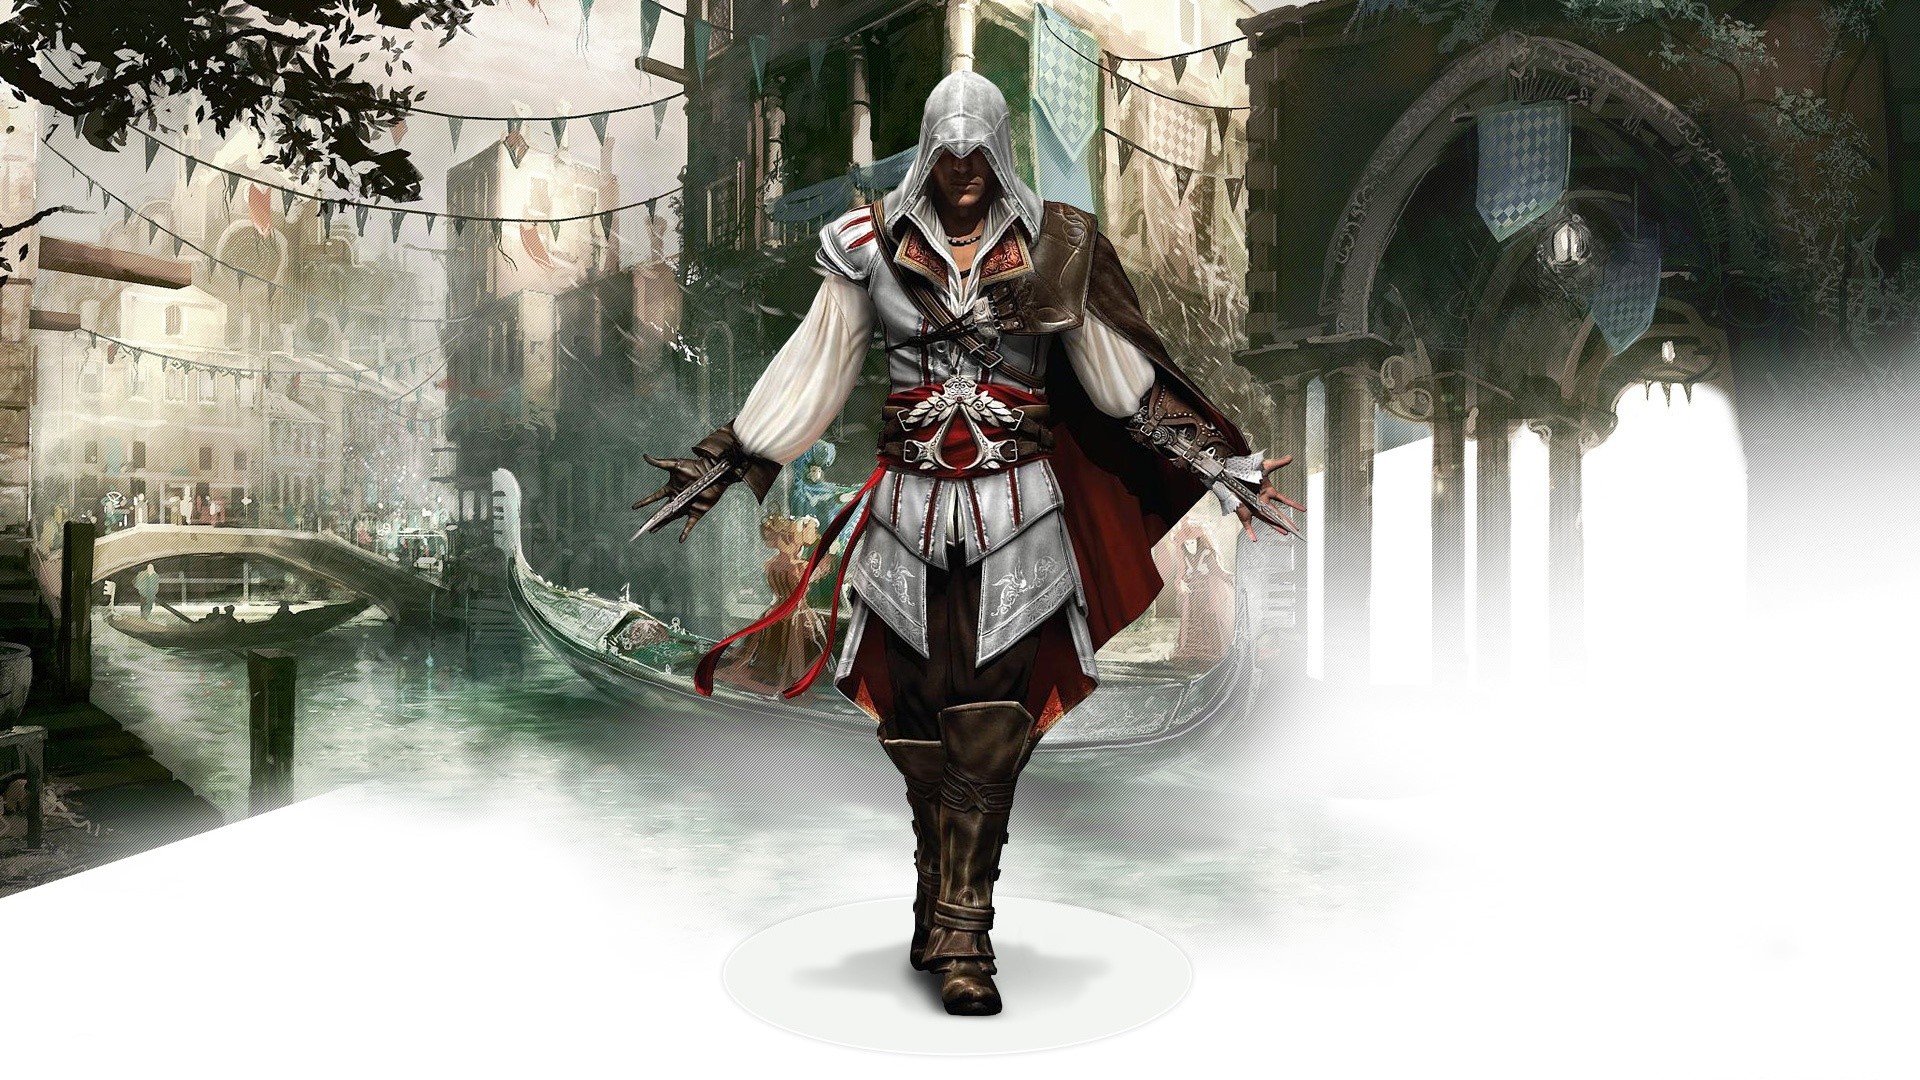 General 1920x1080 Assassin's Creed Ezio Auditore da Firenze Assassin's Creed II video games frontal view PC gaming video game art town standing video game man Venice